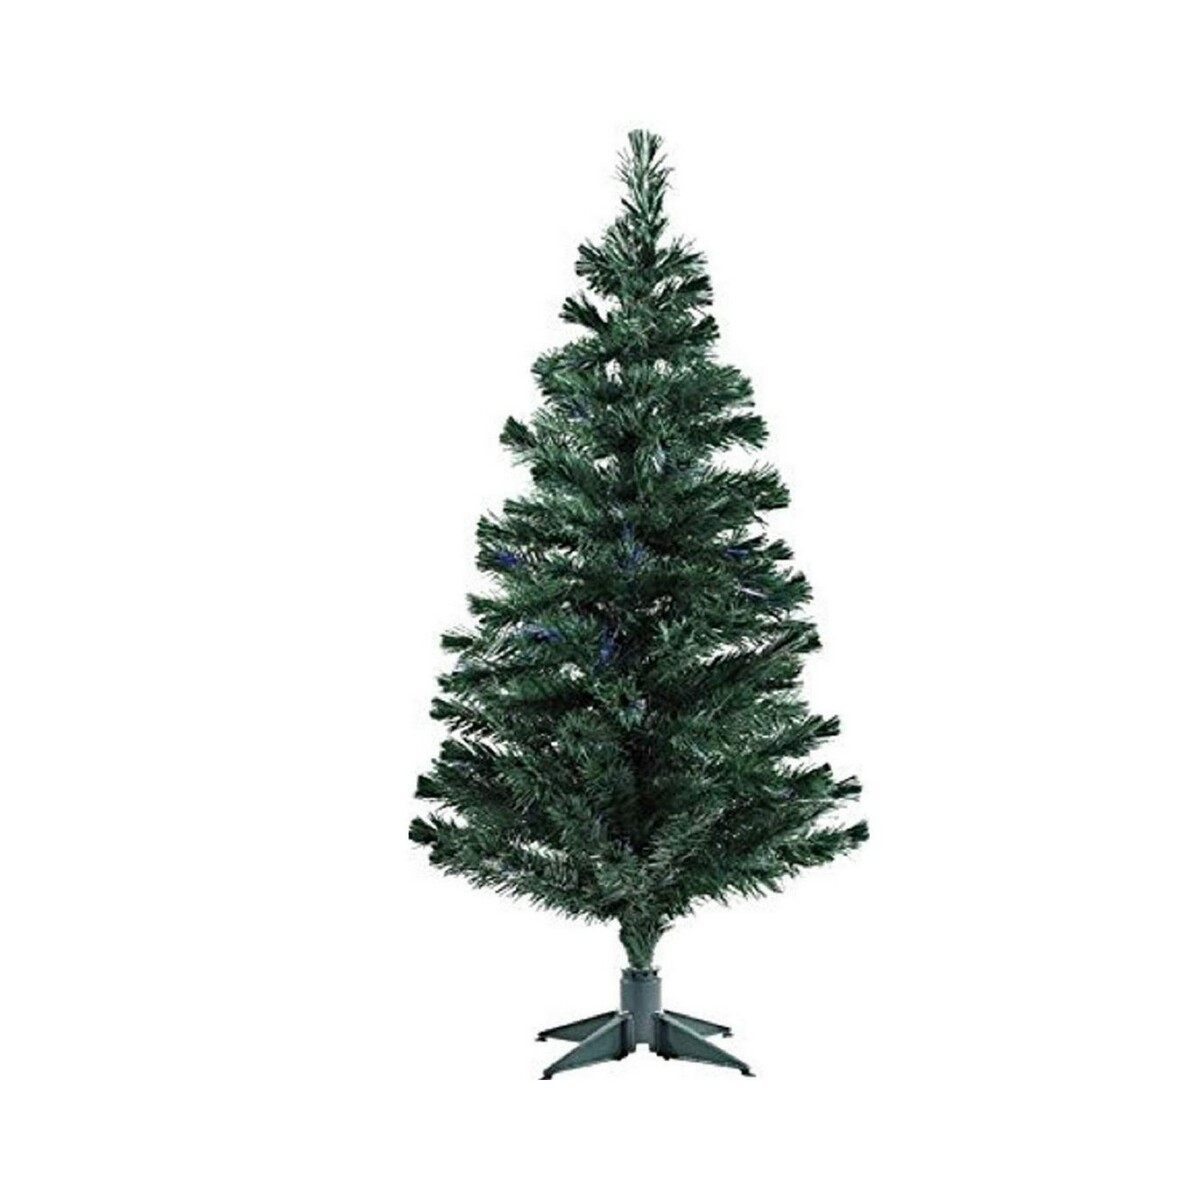 Home Style Christmas Tree Green 8FT 0800